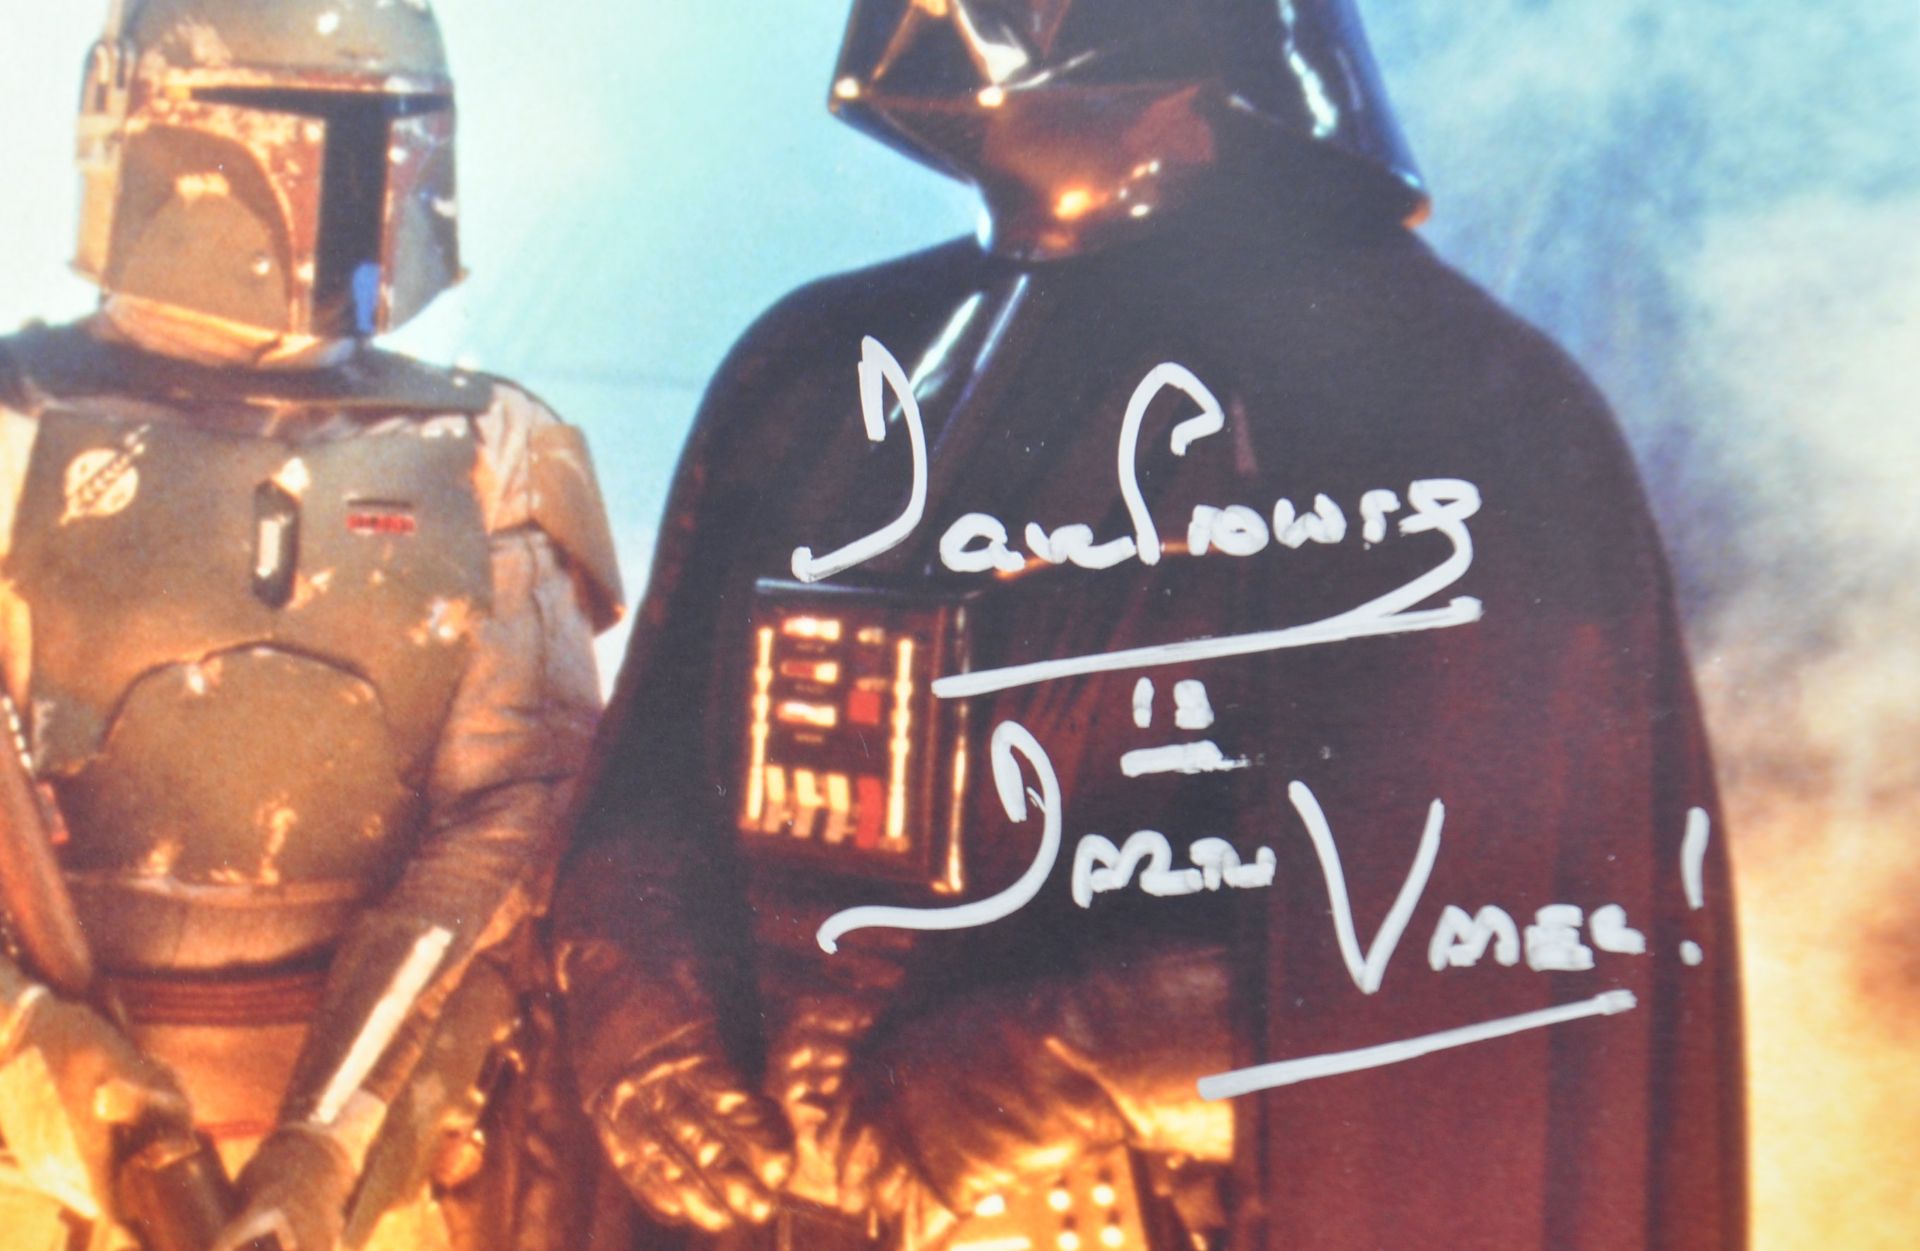 ESTATE OF DAVE PROWSE - PROWSE & JAMES EARL JONES DUAL SIGNED PHOTO - Image 2 of 3